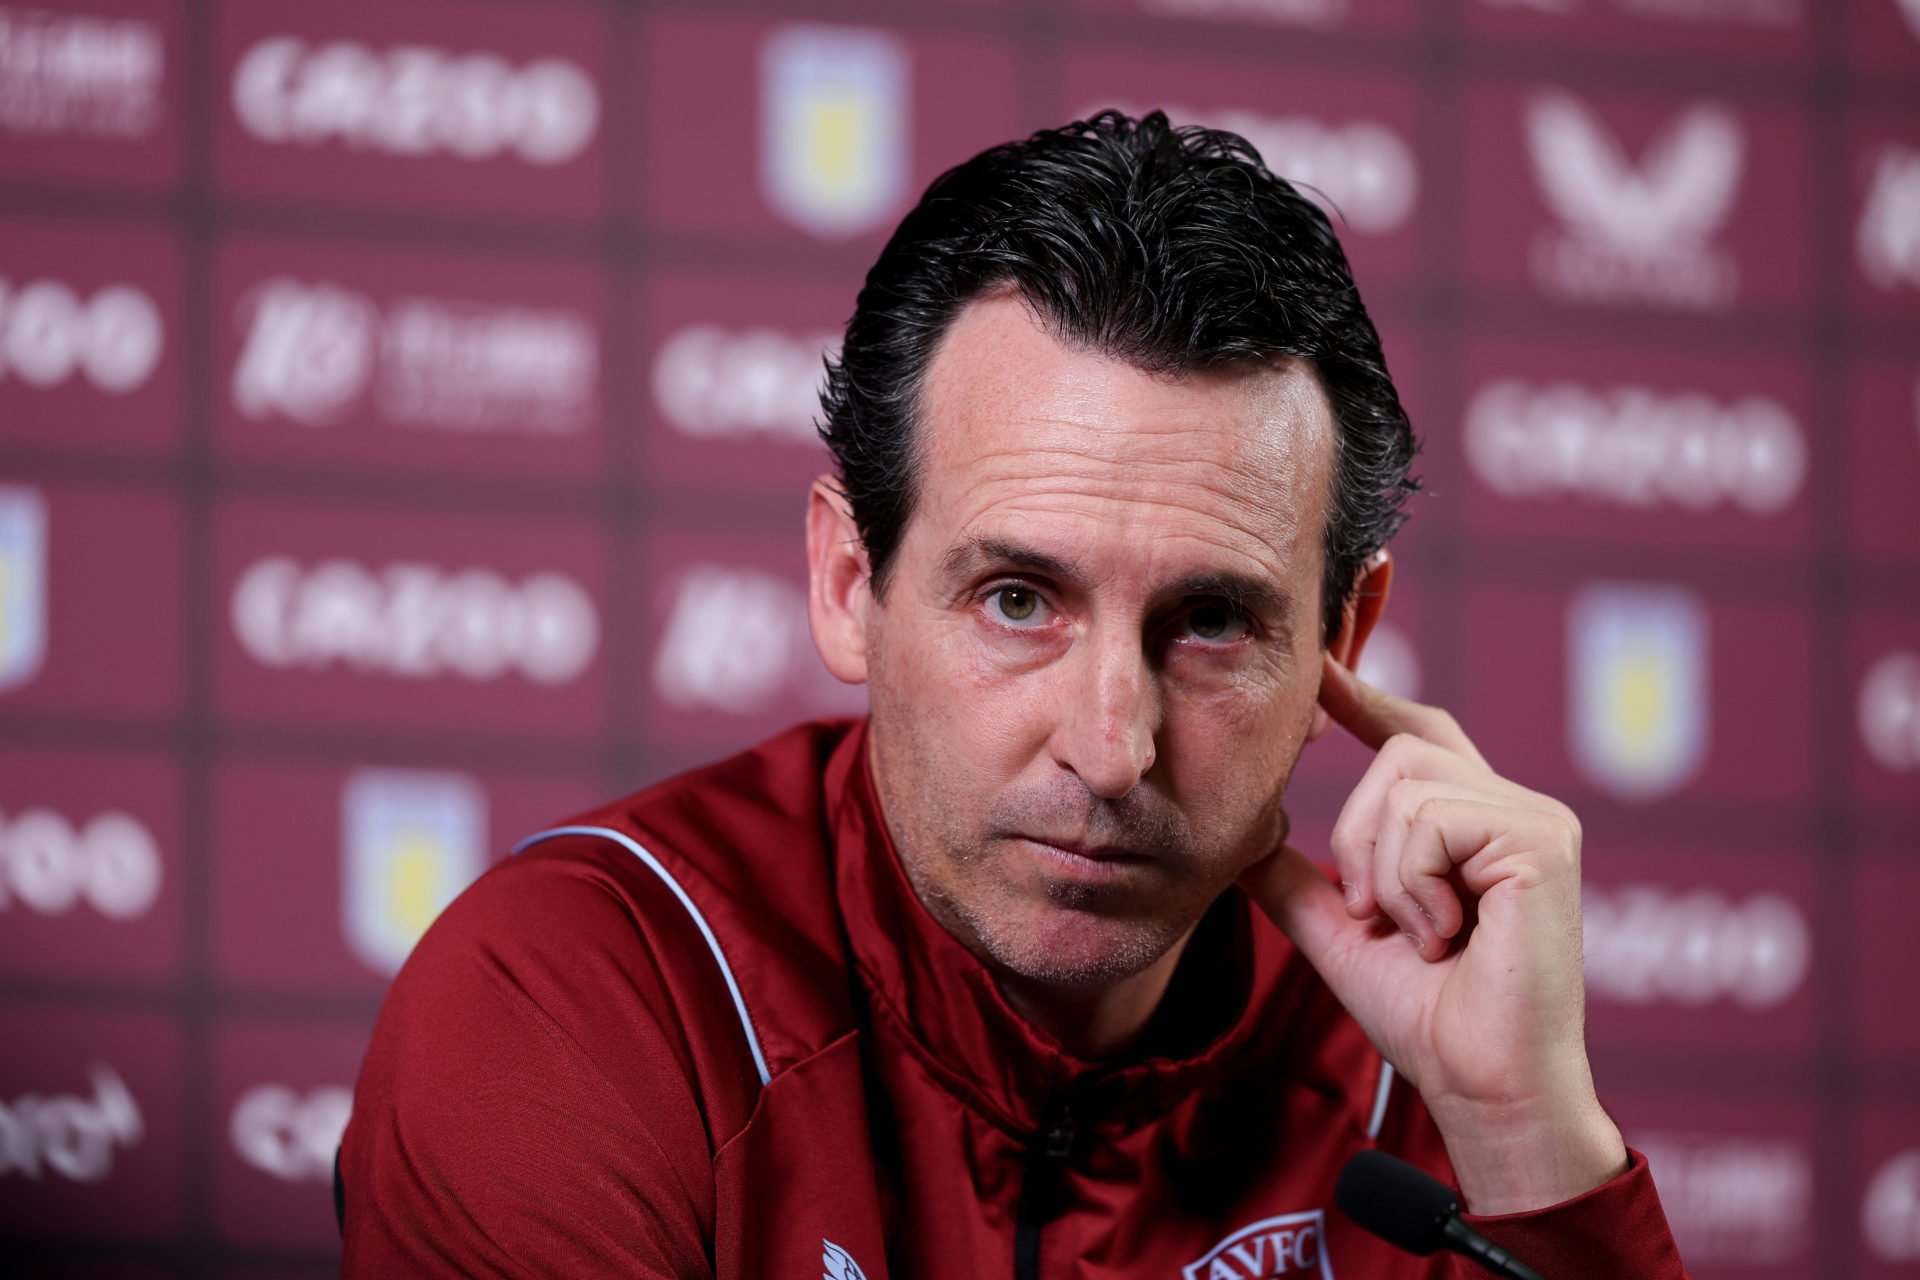 Moyes delivers cutting one-line Unai Emery put down as he lauds Arsenal